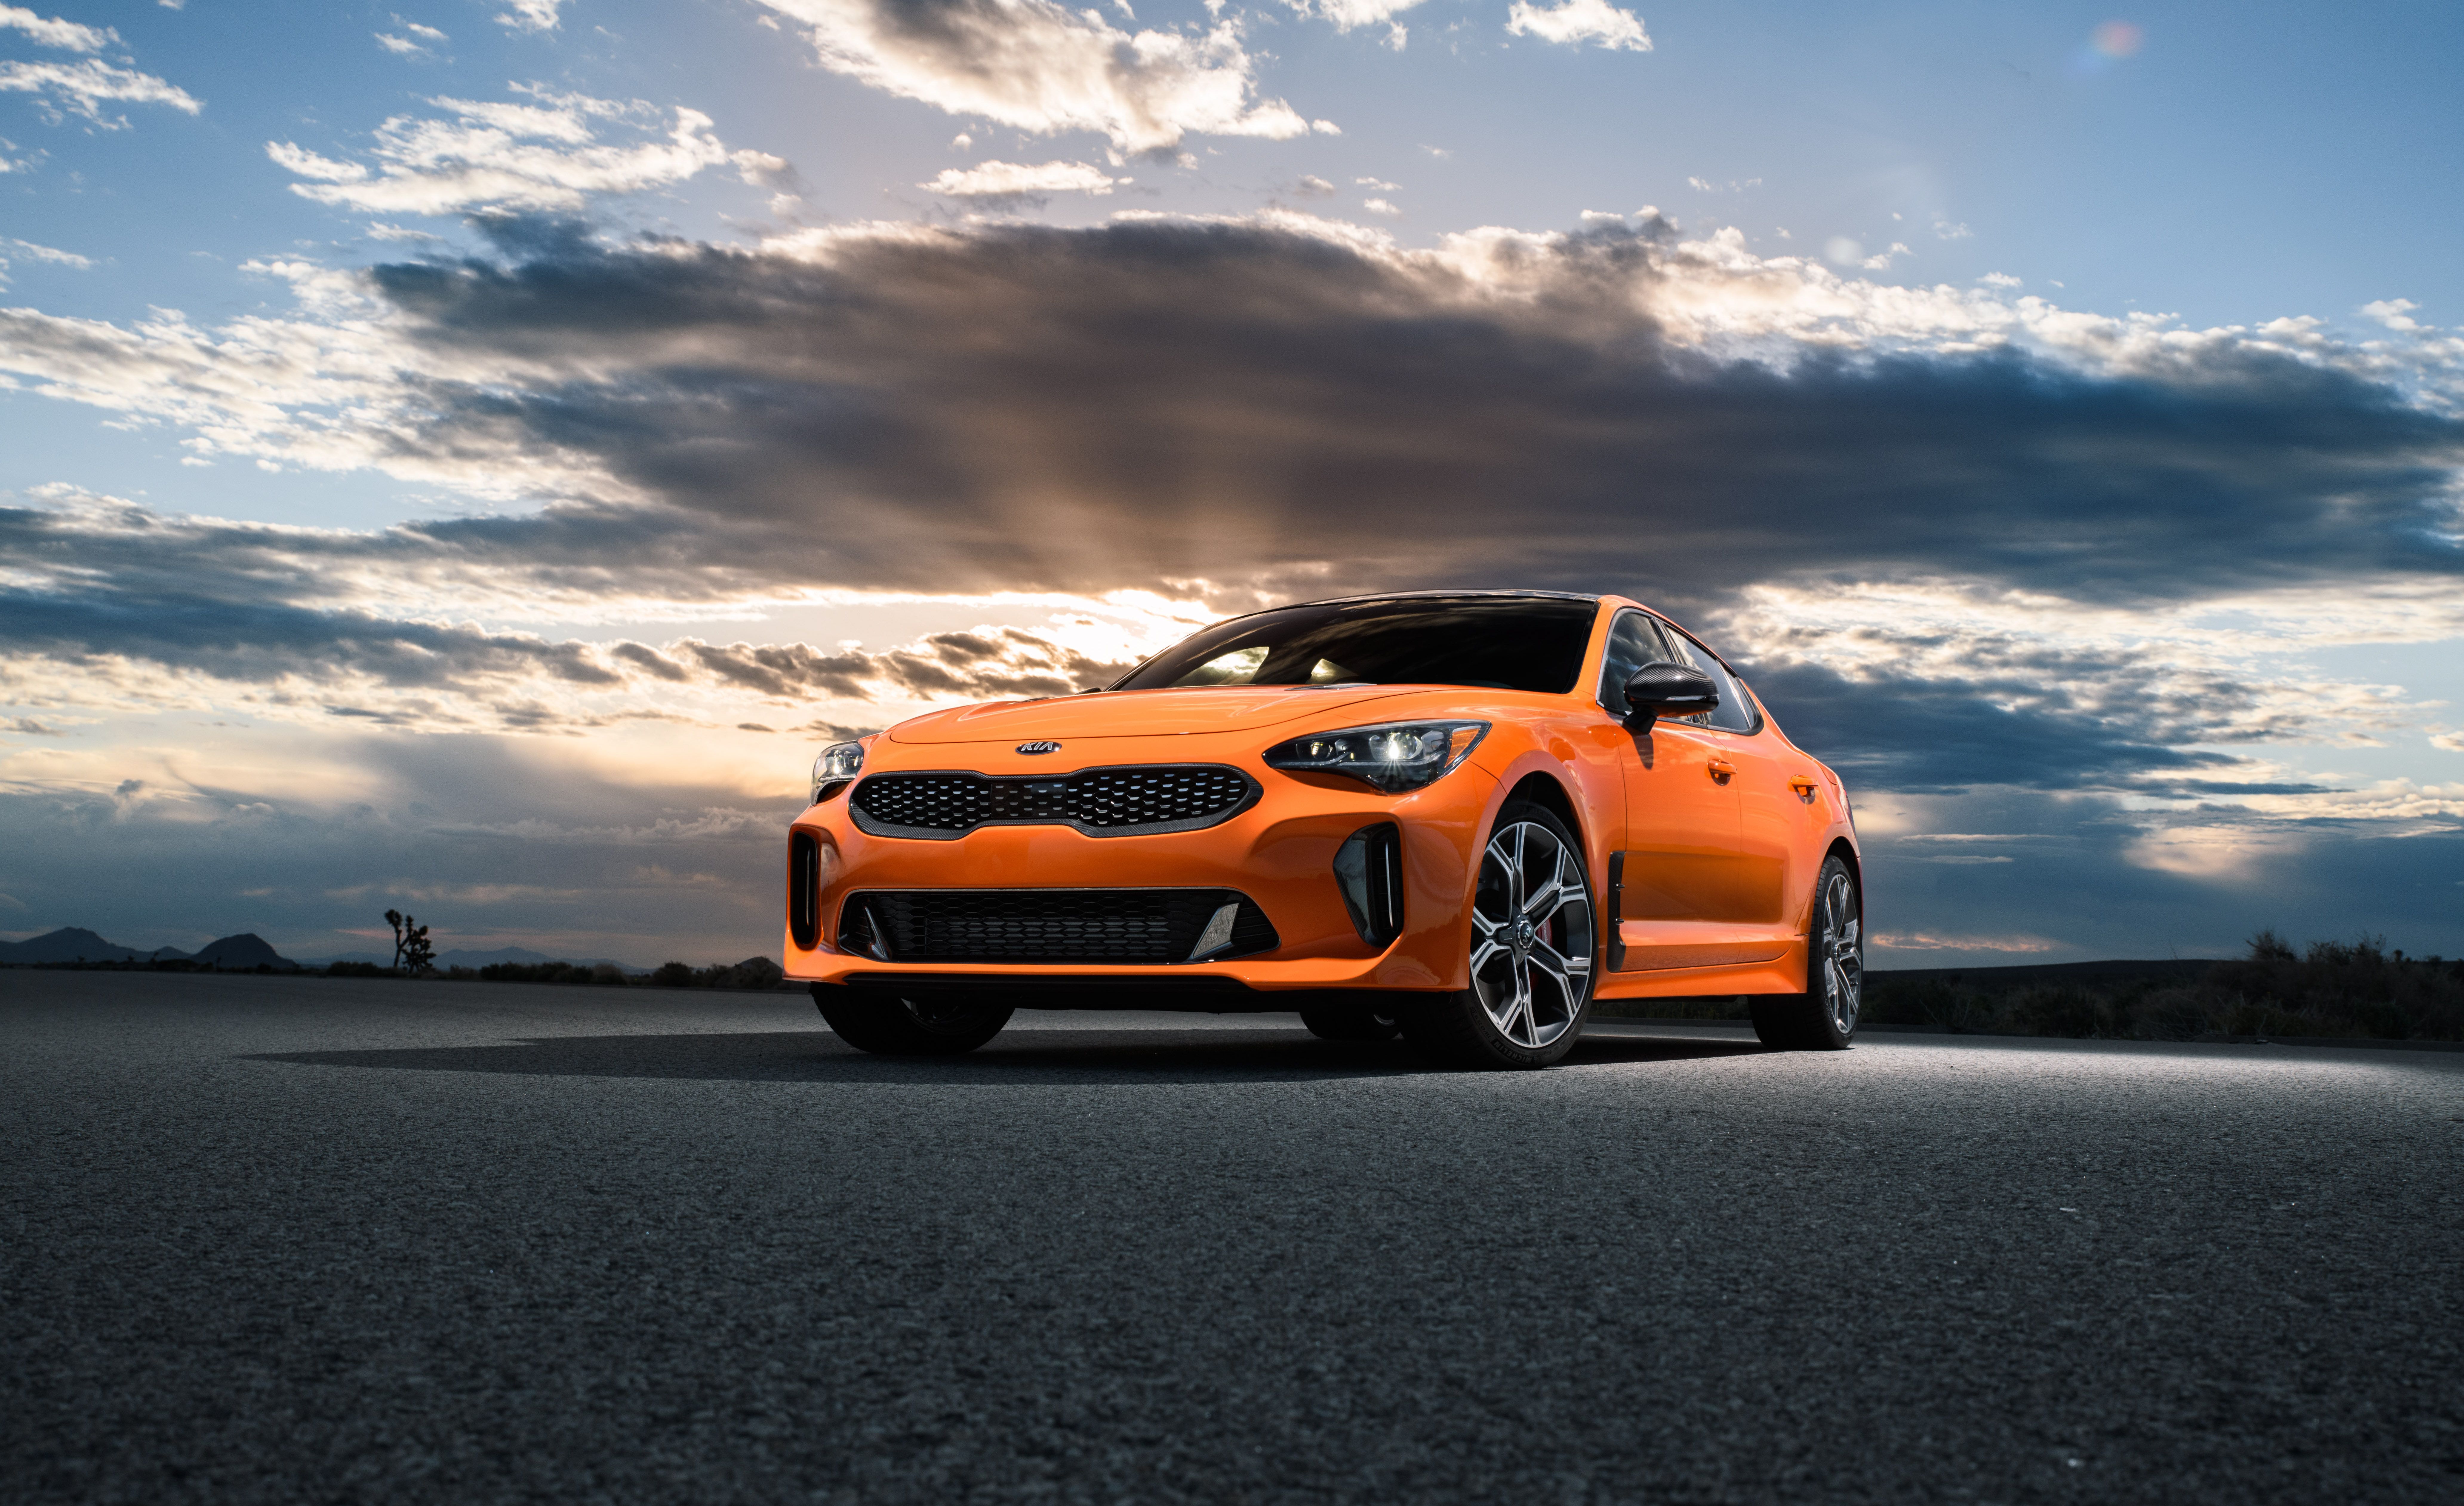 2020 Kia Stinger Review, Pricing, and Specs